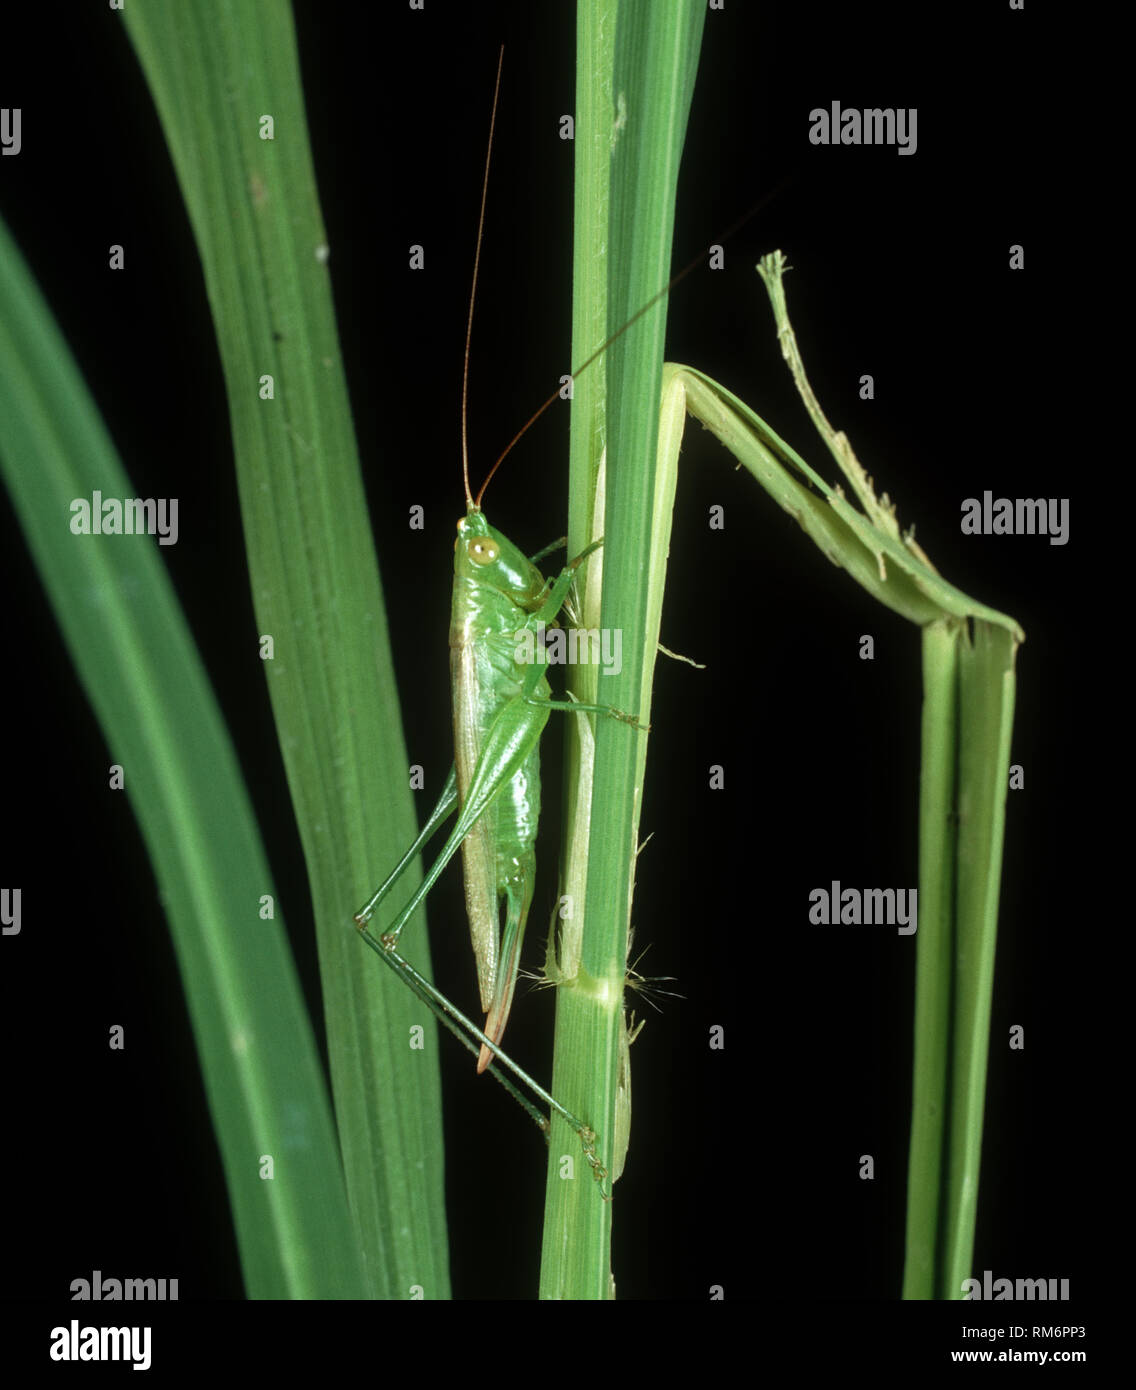 Meadow or long-horned grasshopper (Conocephalus longipennis) pest of rice & predator of rice bugs and stem borers, Philippines Stock Photo